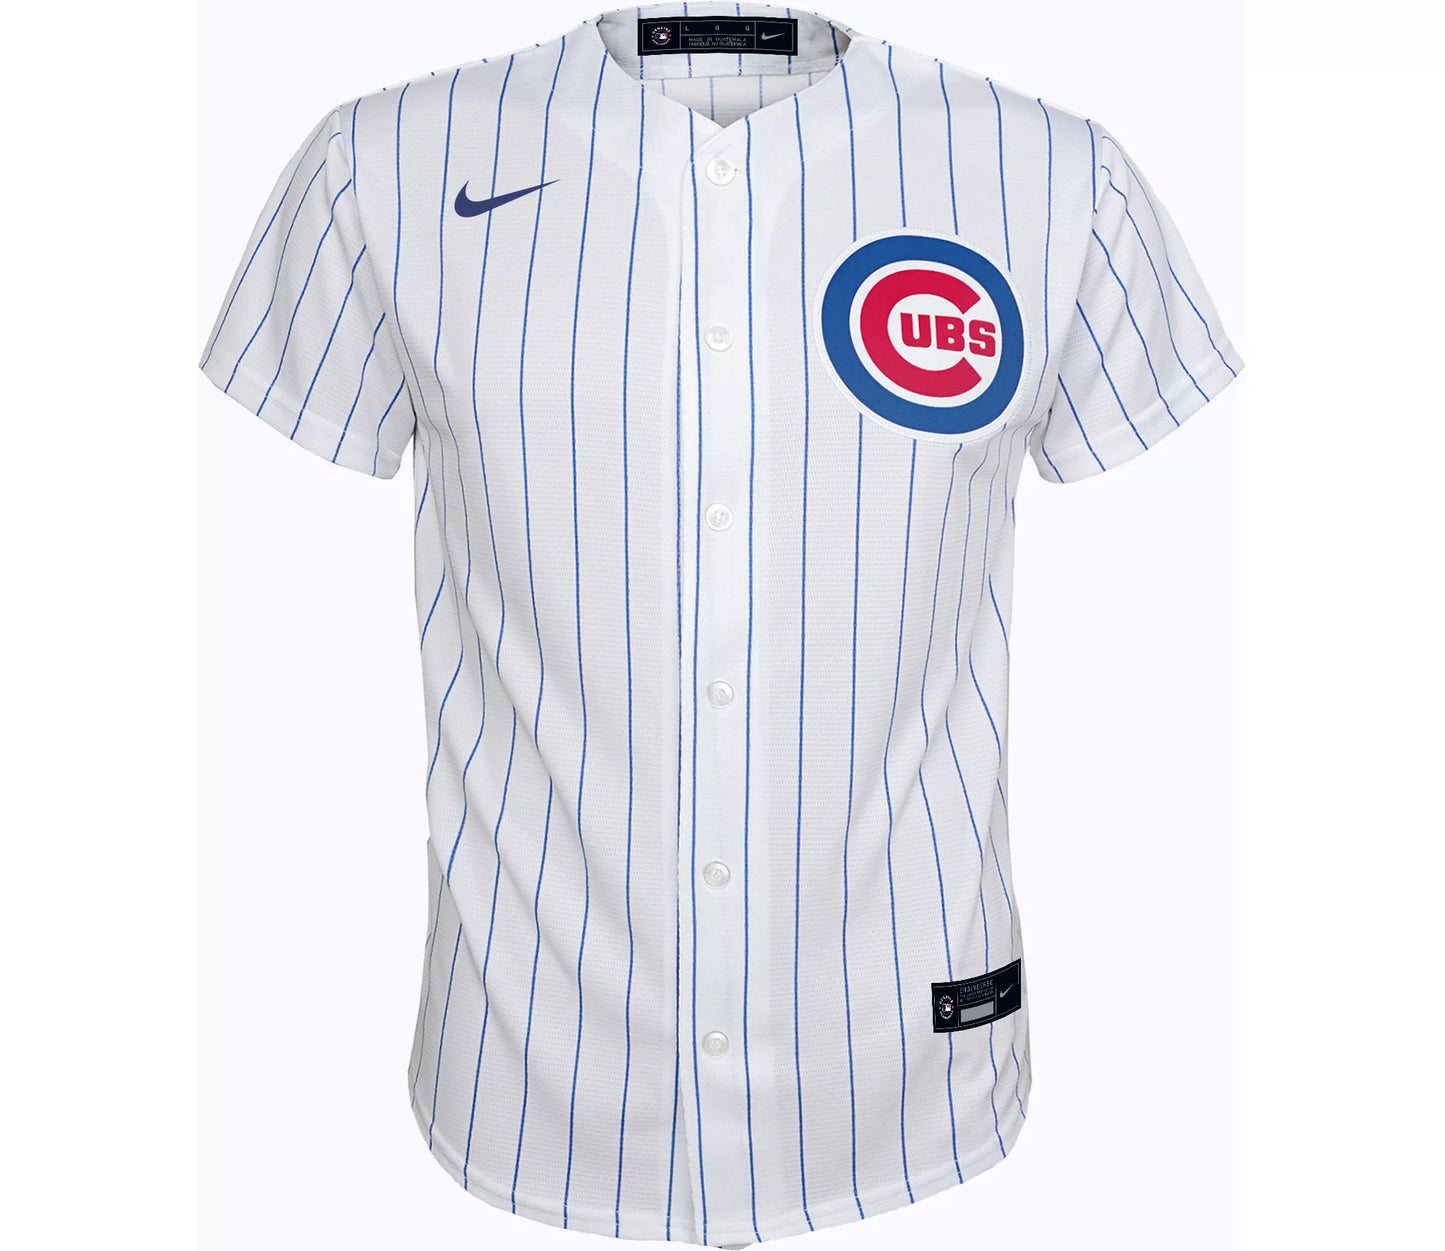 Youth Nike Nico Hoerner Chicago Cubs White Home Screen Print Replica Jersey